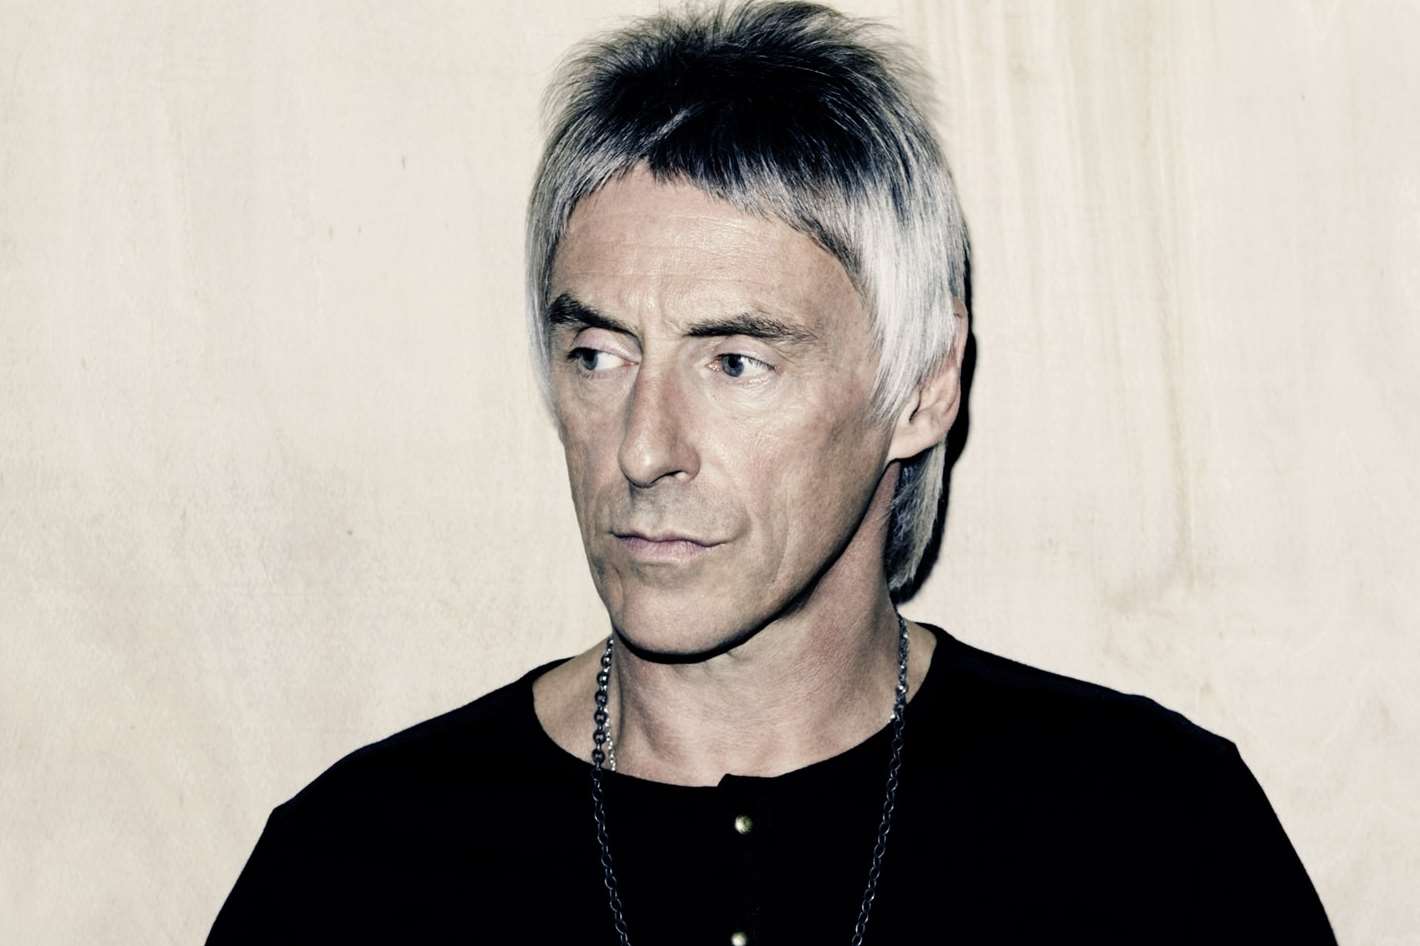 One of the UK's most influential musicians Paul Weller who played at Bedgebury Pinetum